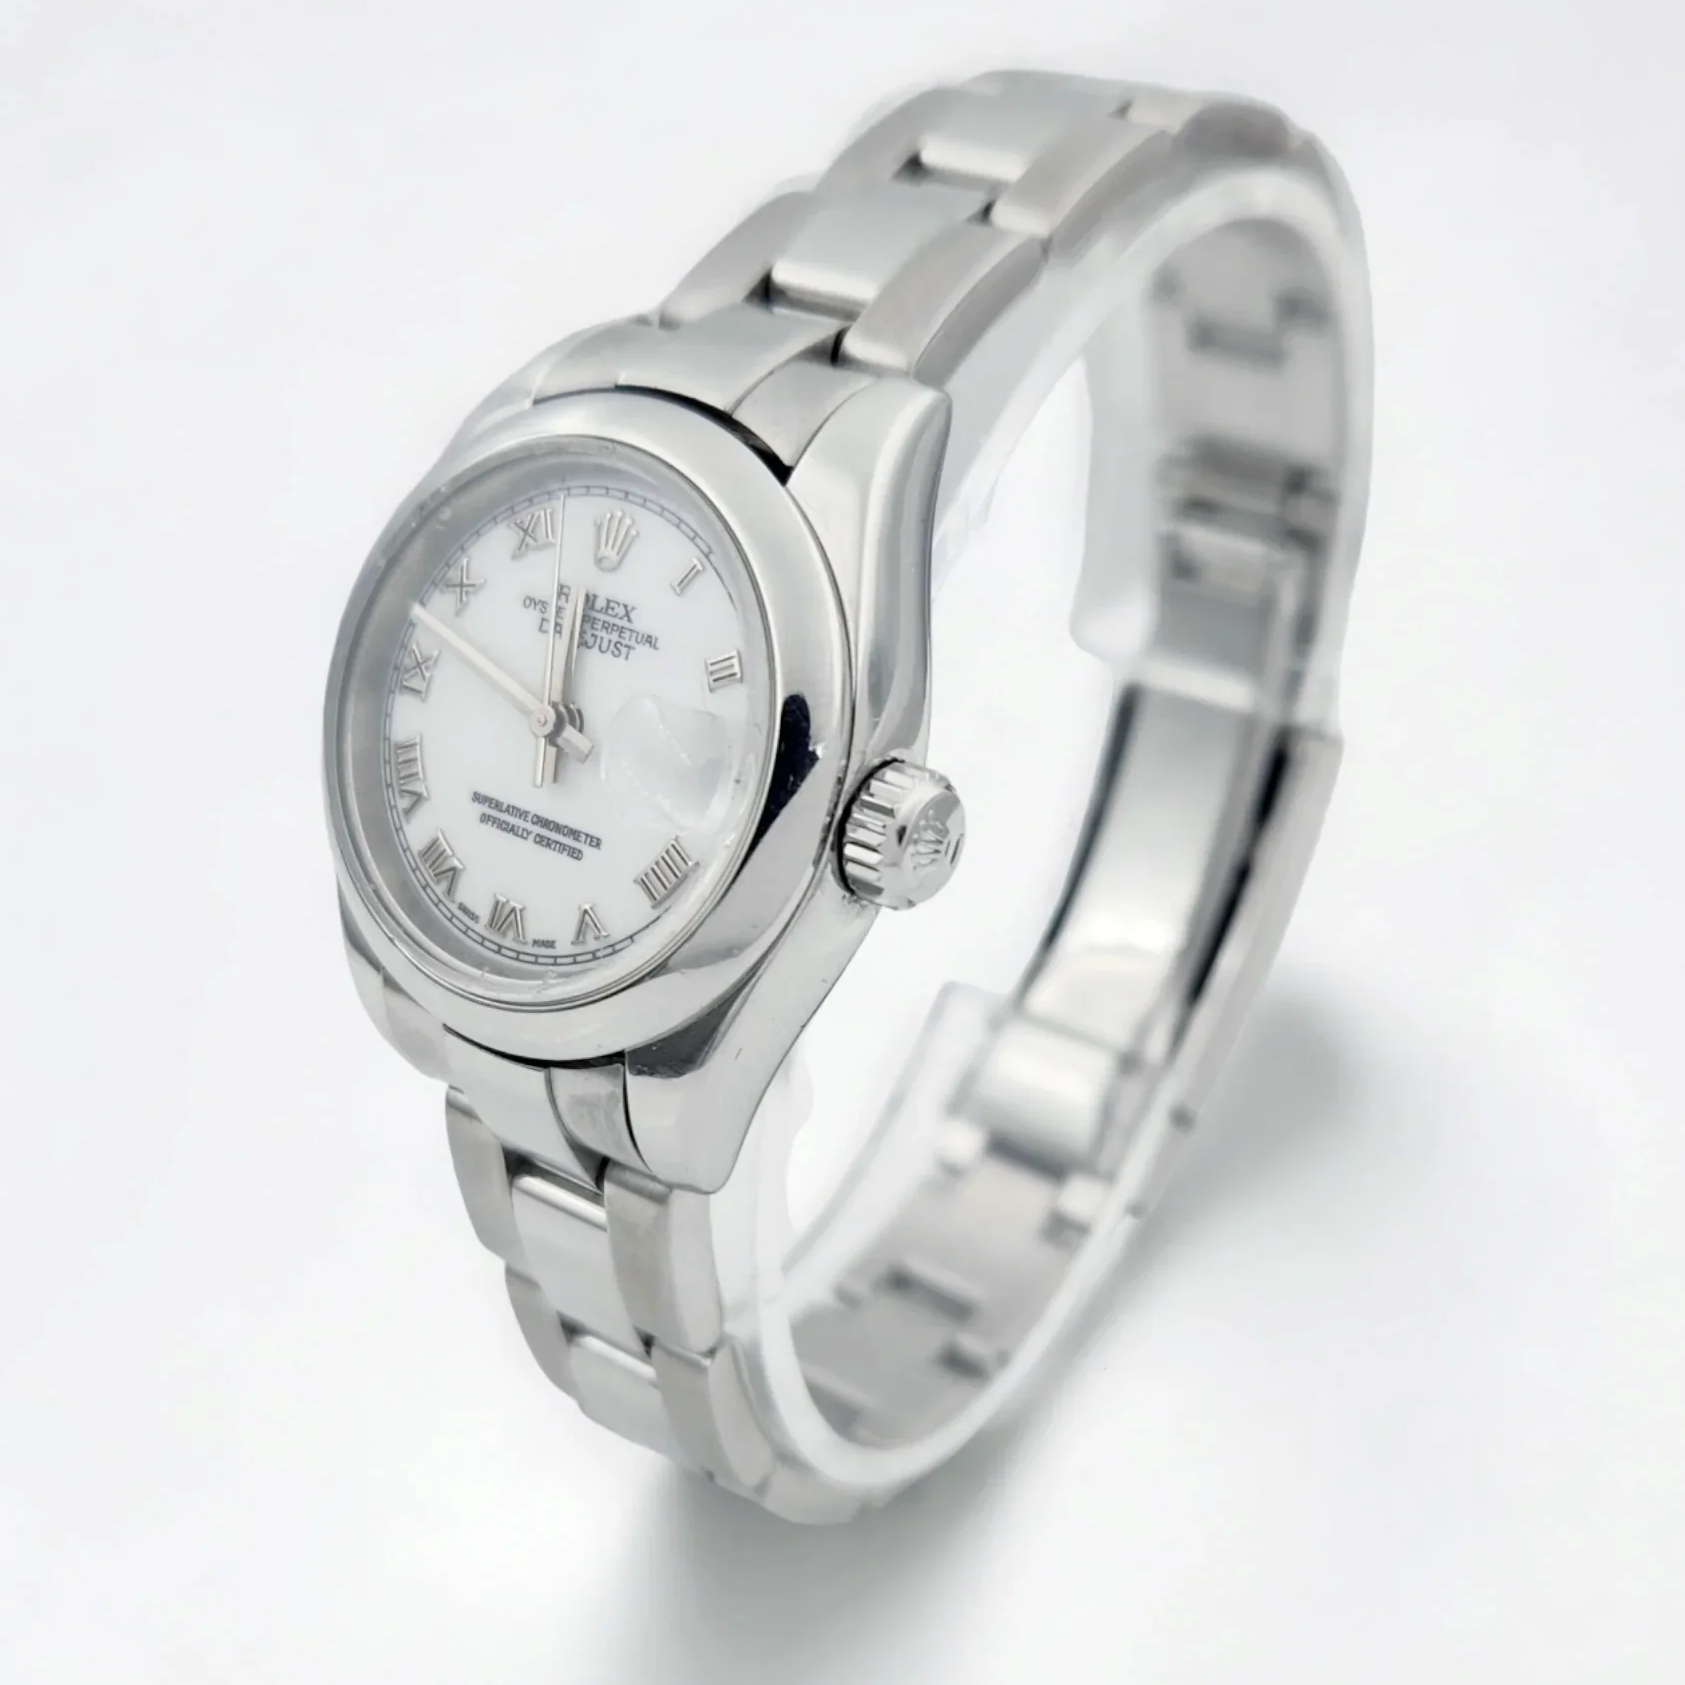 Ladies Rolex 26mm DateJust Stainless Steel Watch with White Dial and Smooth Bezel. (Pre-Owned)